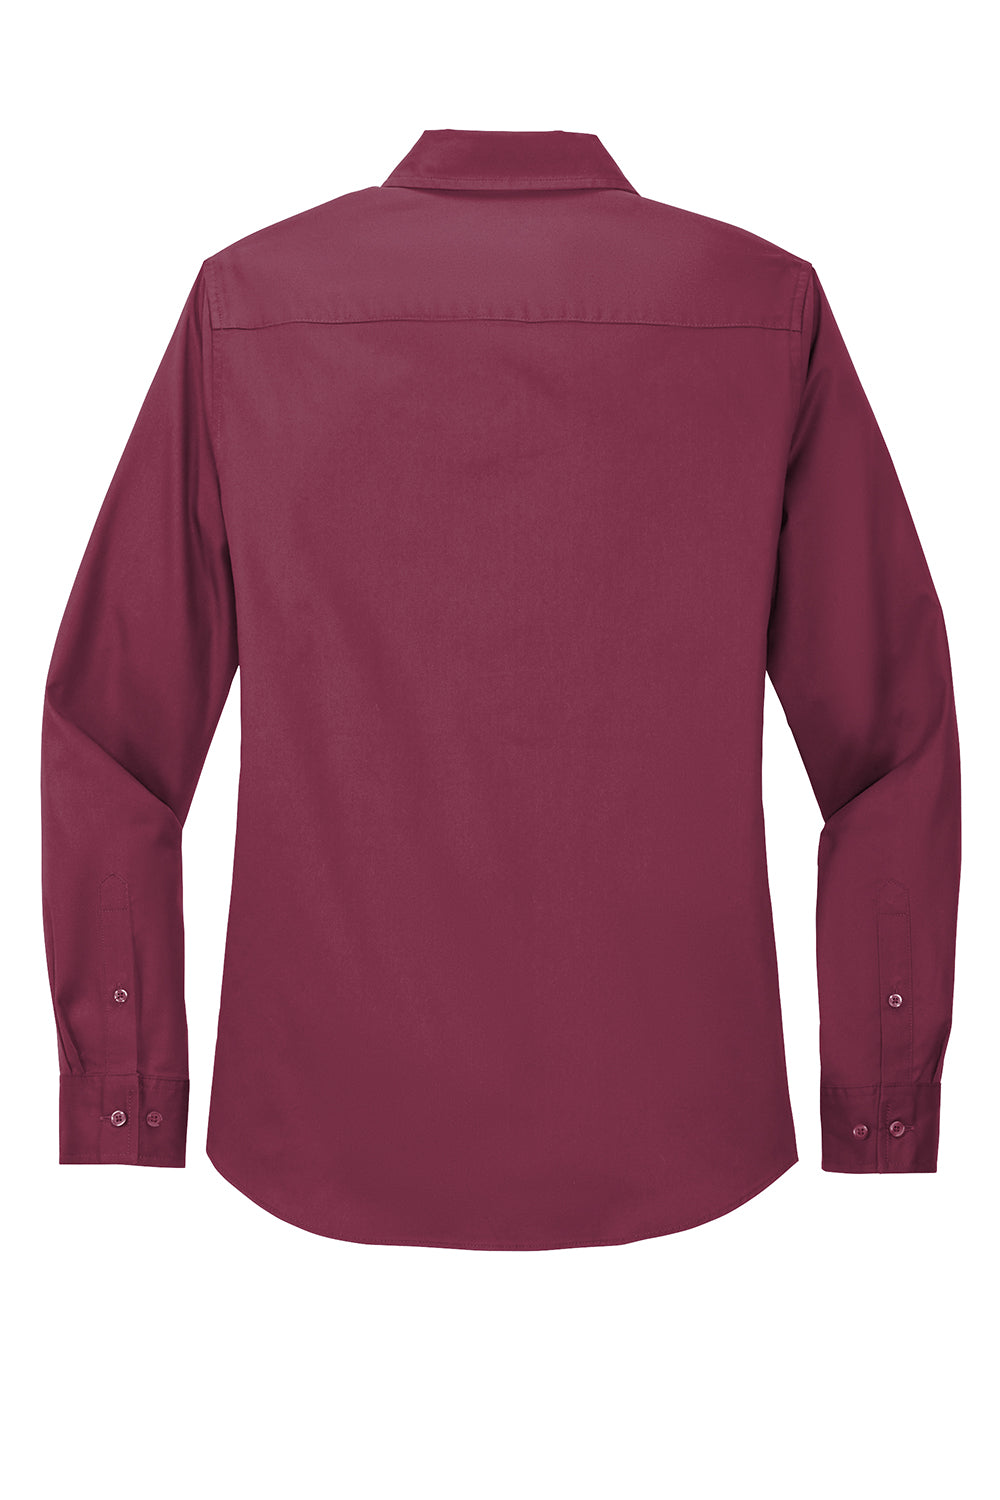 Port Authority L608 Womens Easy Care Wrinkle Resistant Long Sleeve Button Down Shirt Burgundy Flat Back